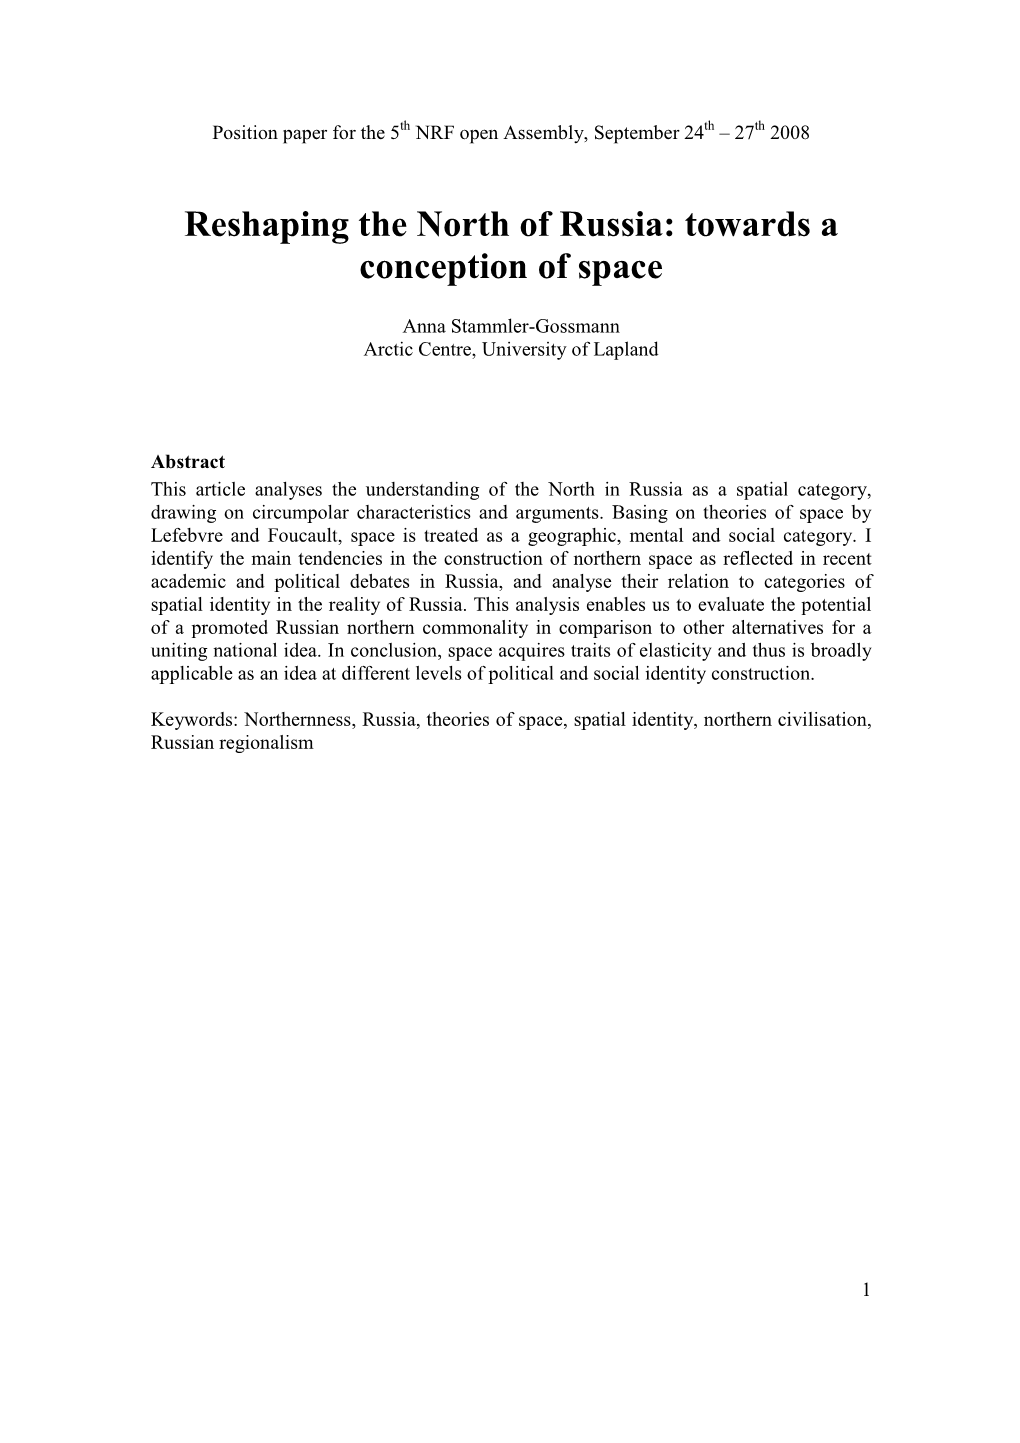 Reshaping the North of Russia: Towards a Conception of Space